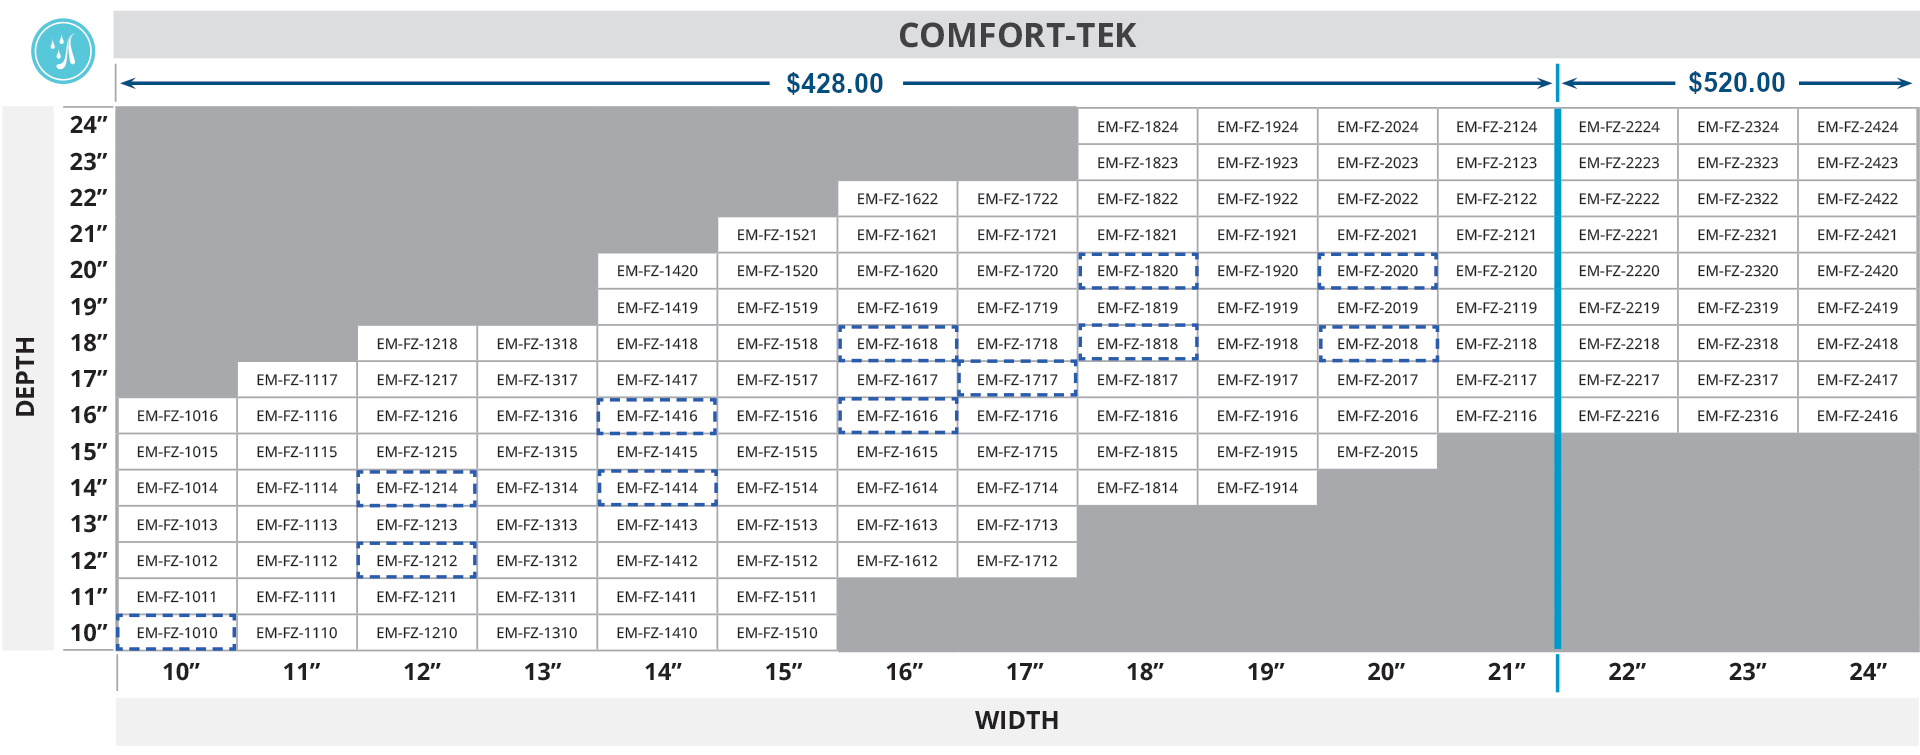 https://www.comfortcompany.com/images/form_images/seat_dimensions/sizes-Embrace_ZeroElevation.jpg